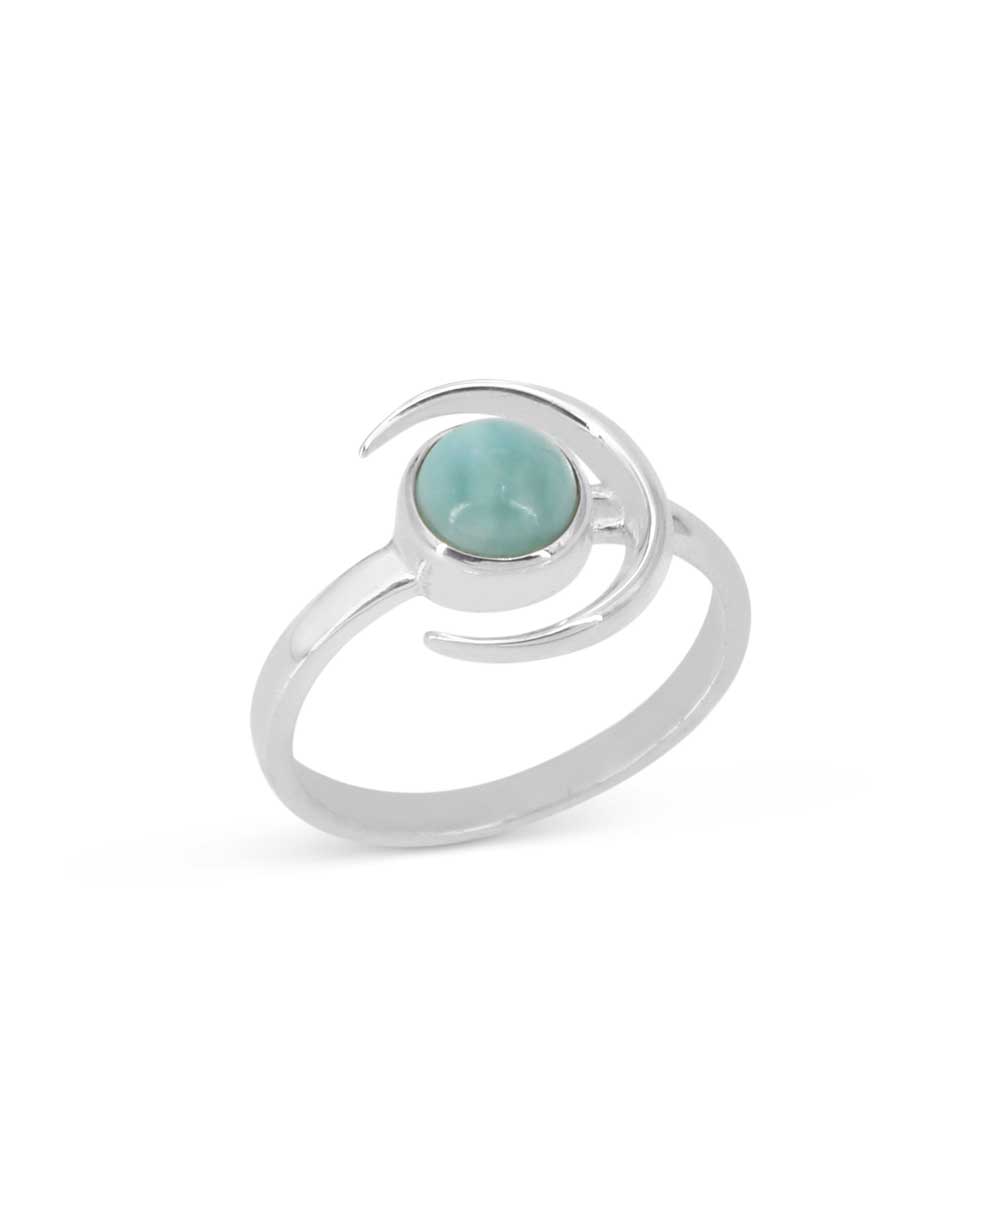 Sterling Silver Larimar Gemstone Ring with Crescent Moon Design - Rings 6